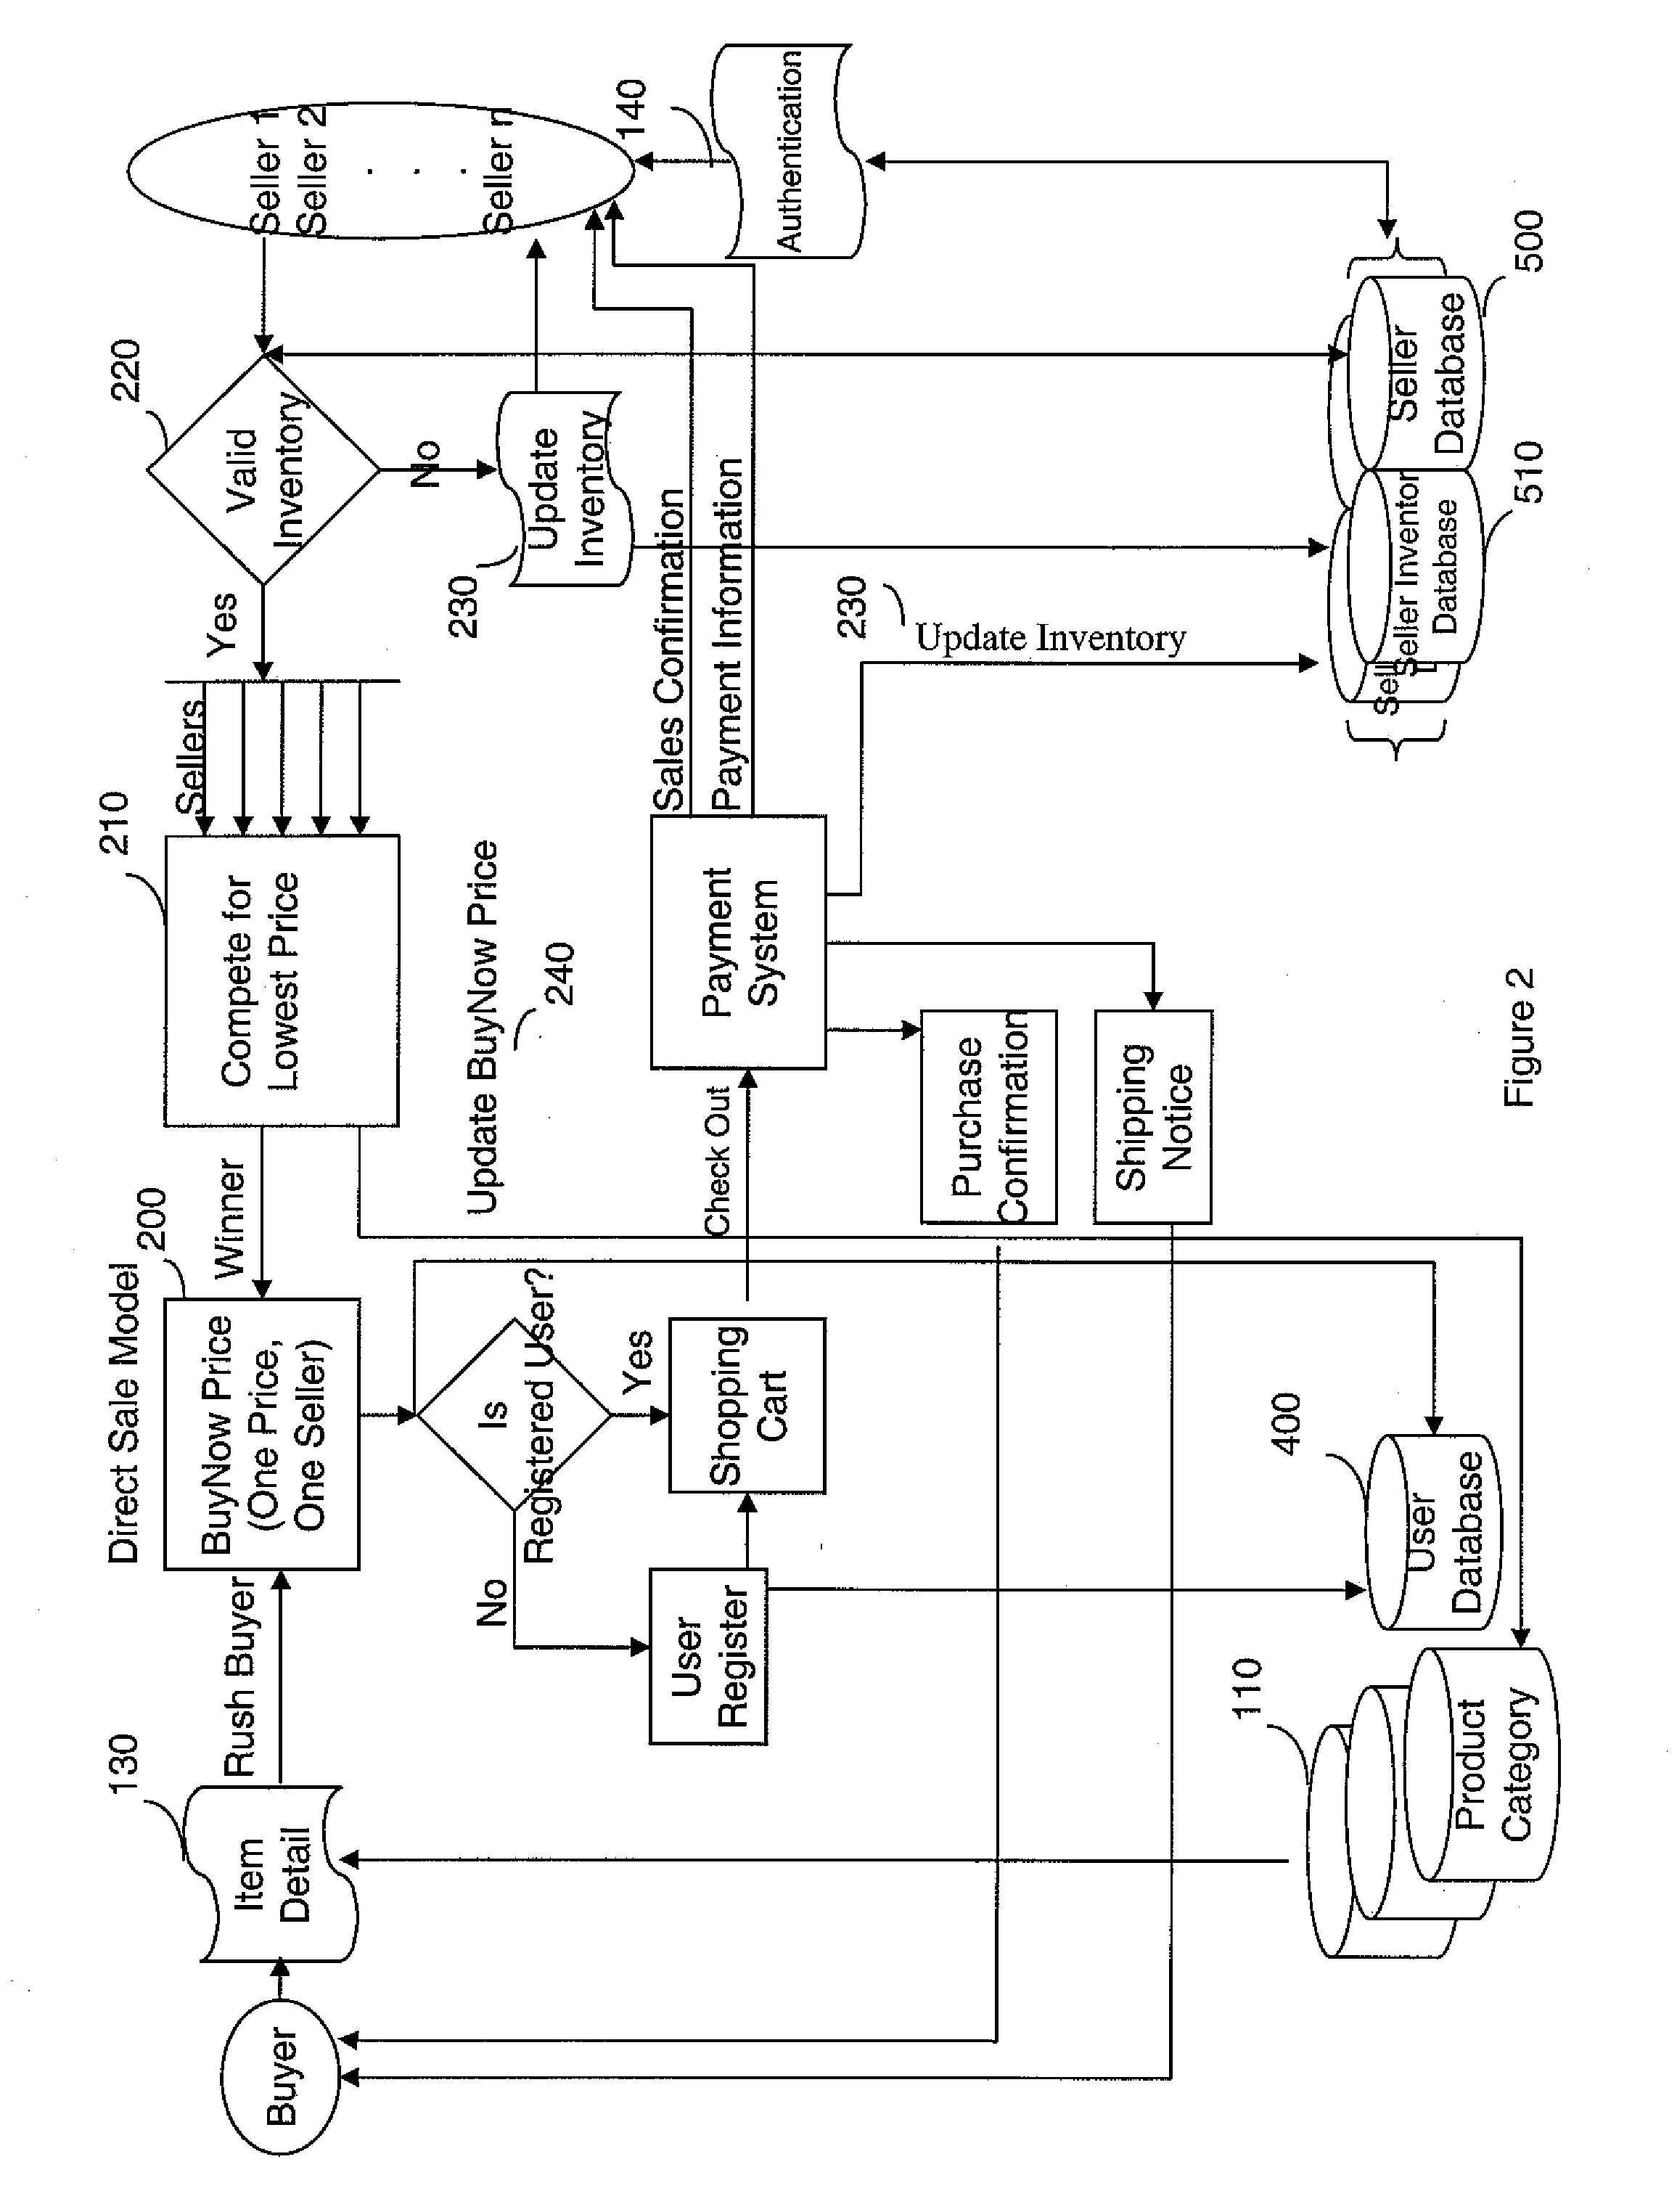 System and method for accelerating convergence between buyers and sellers of products